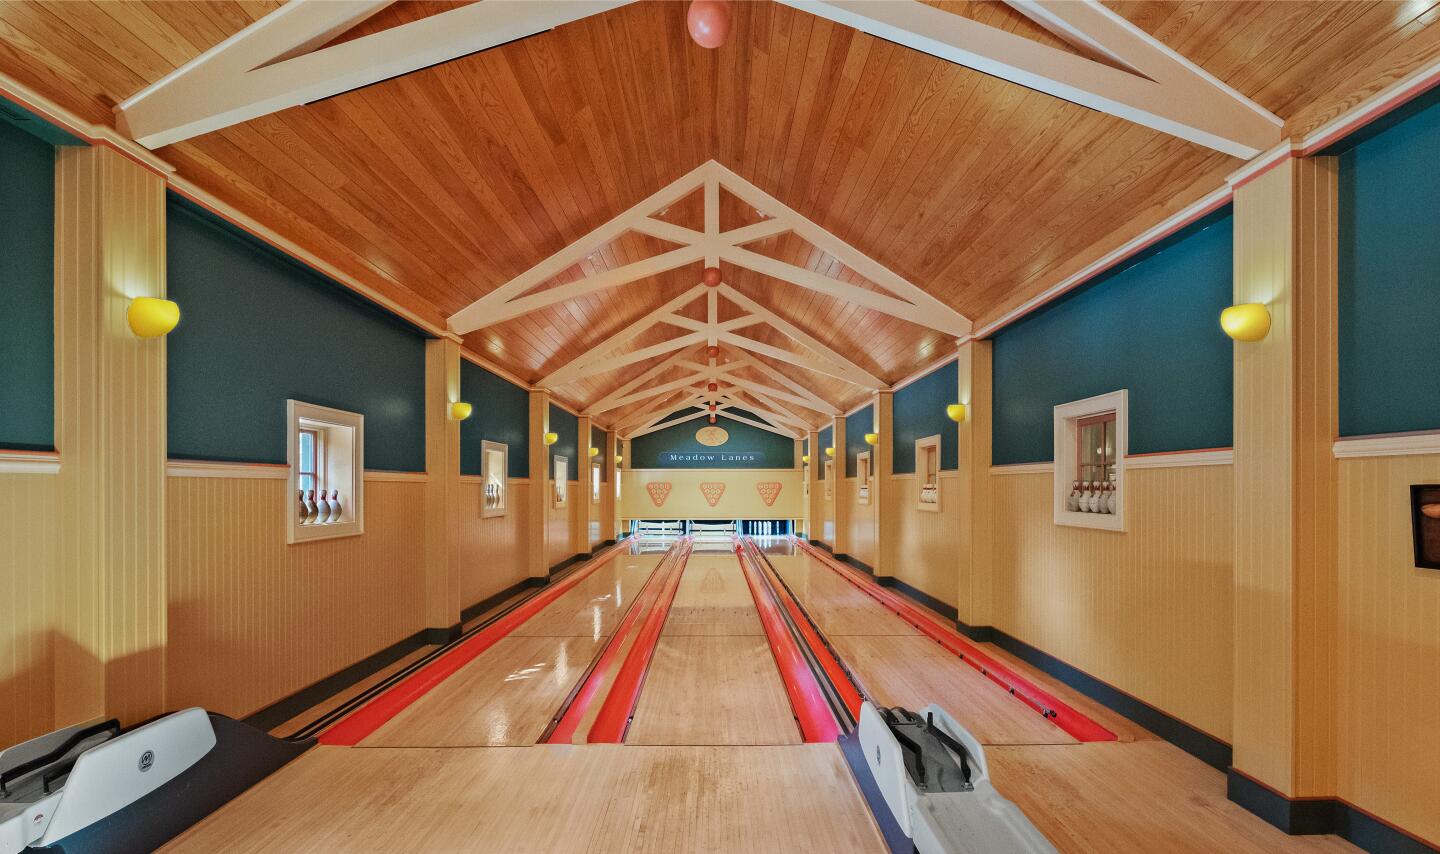 The bowling alley.